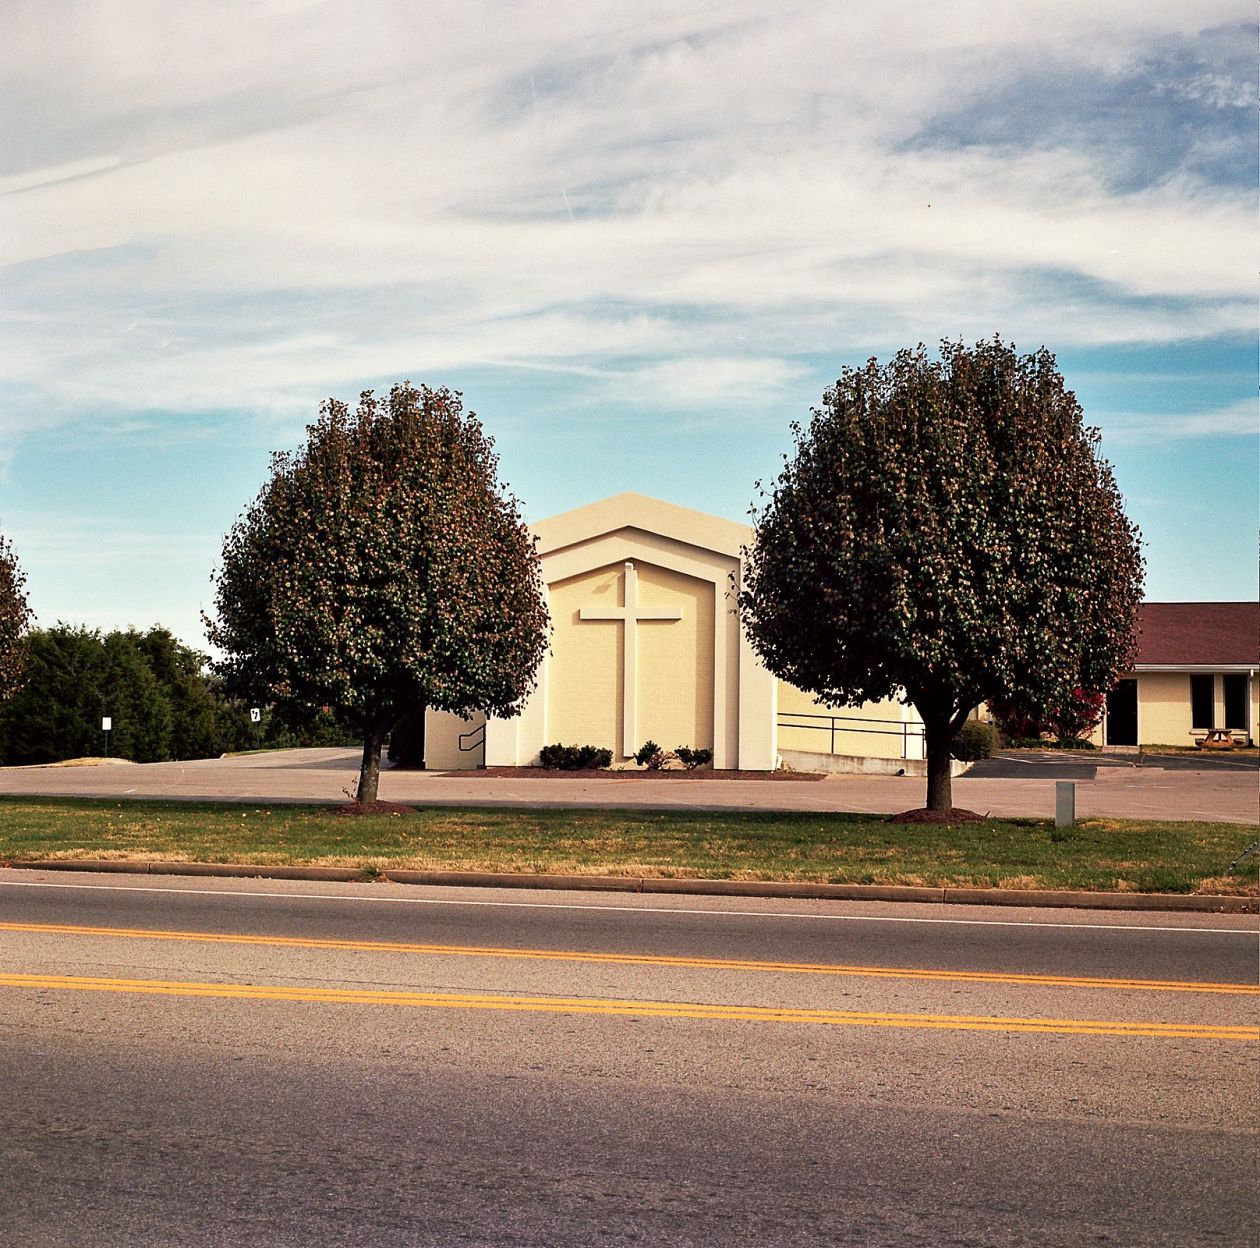 A small church on the side of a road with trees in the foreground.